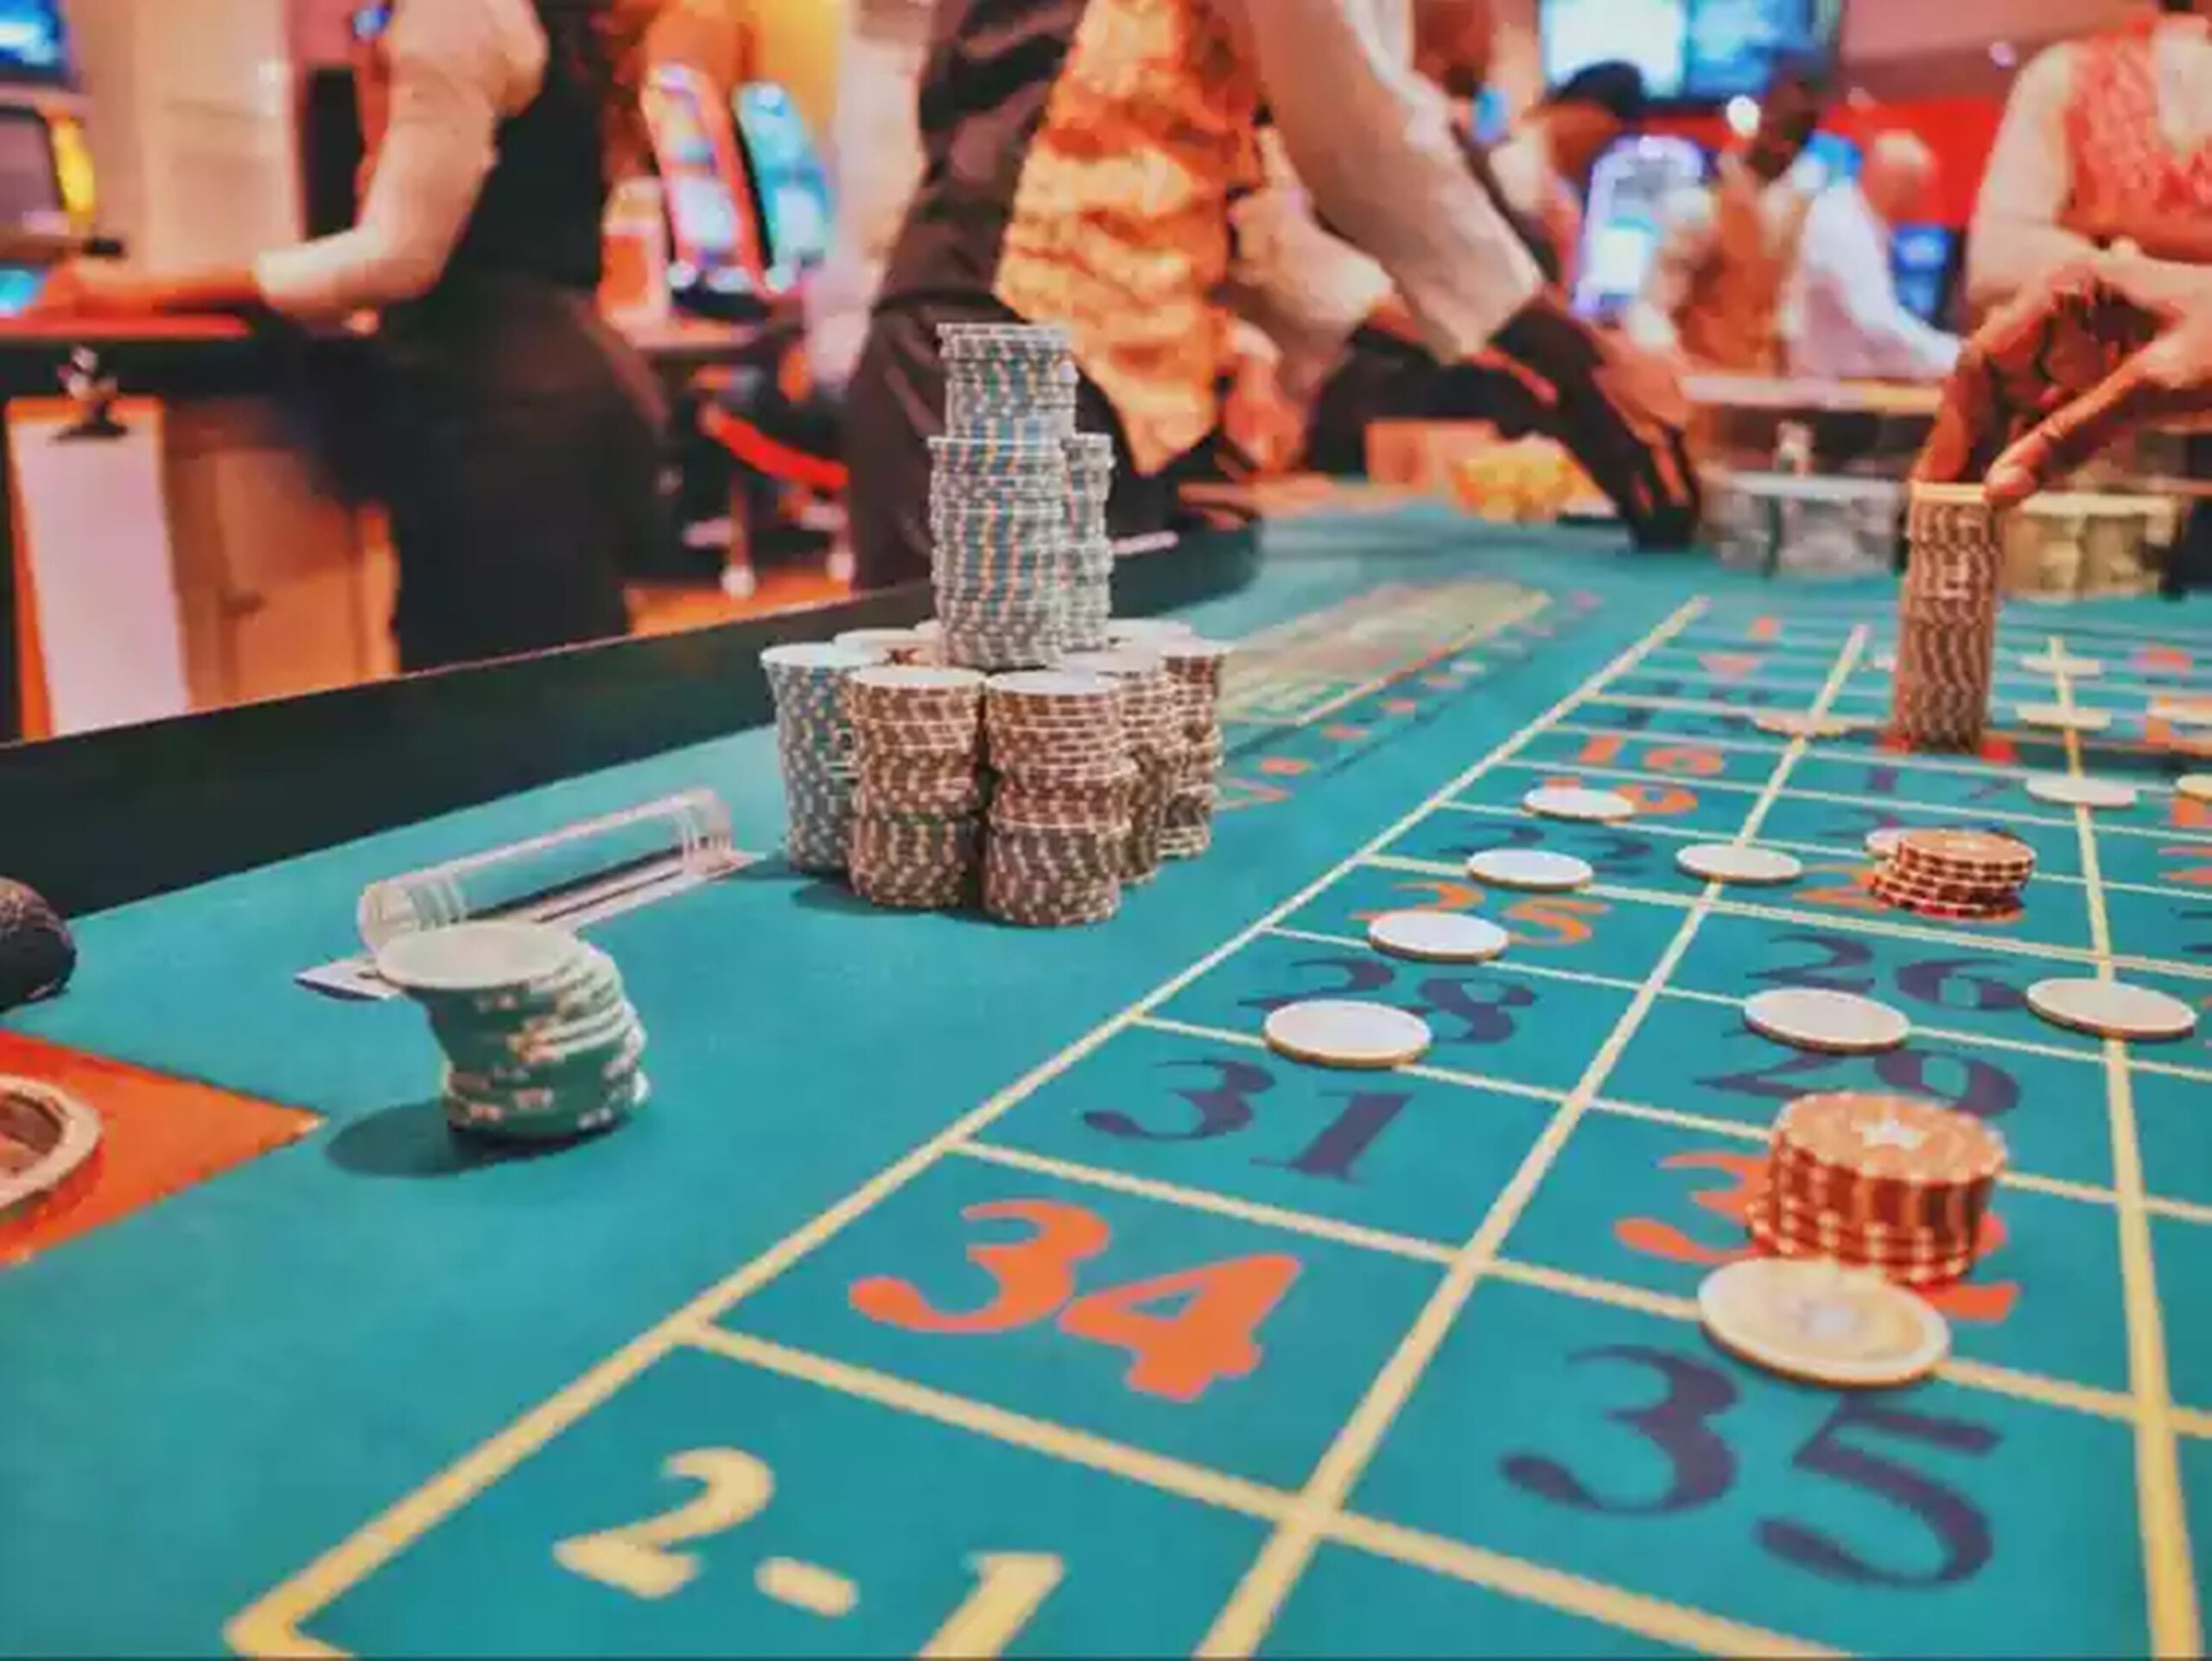 10 Awesome Tips About casino online From Unlikely Websites